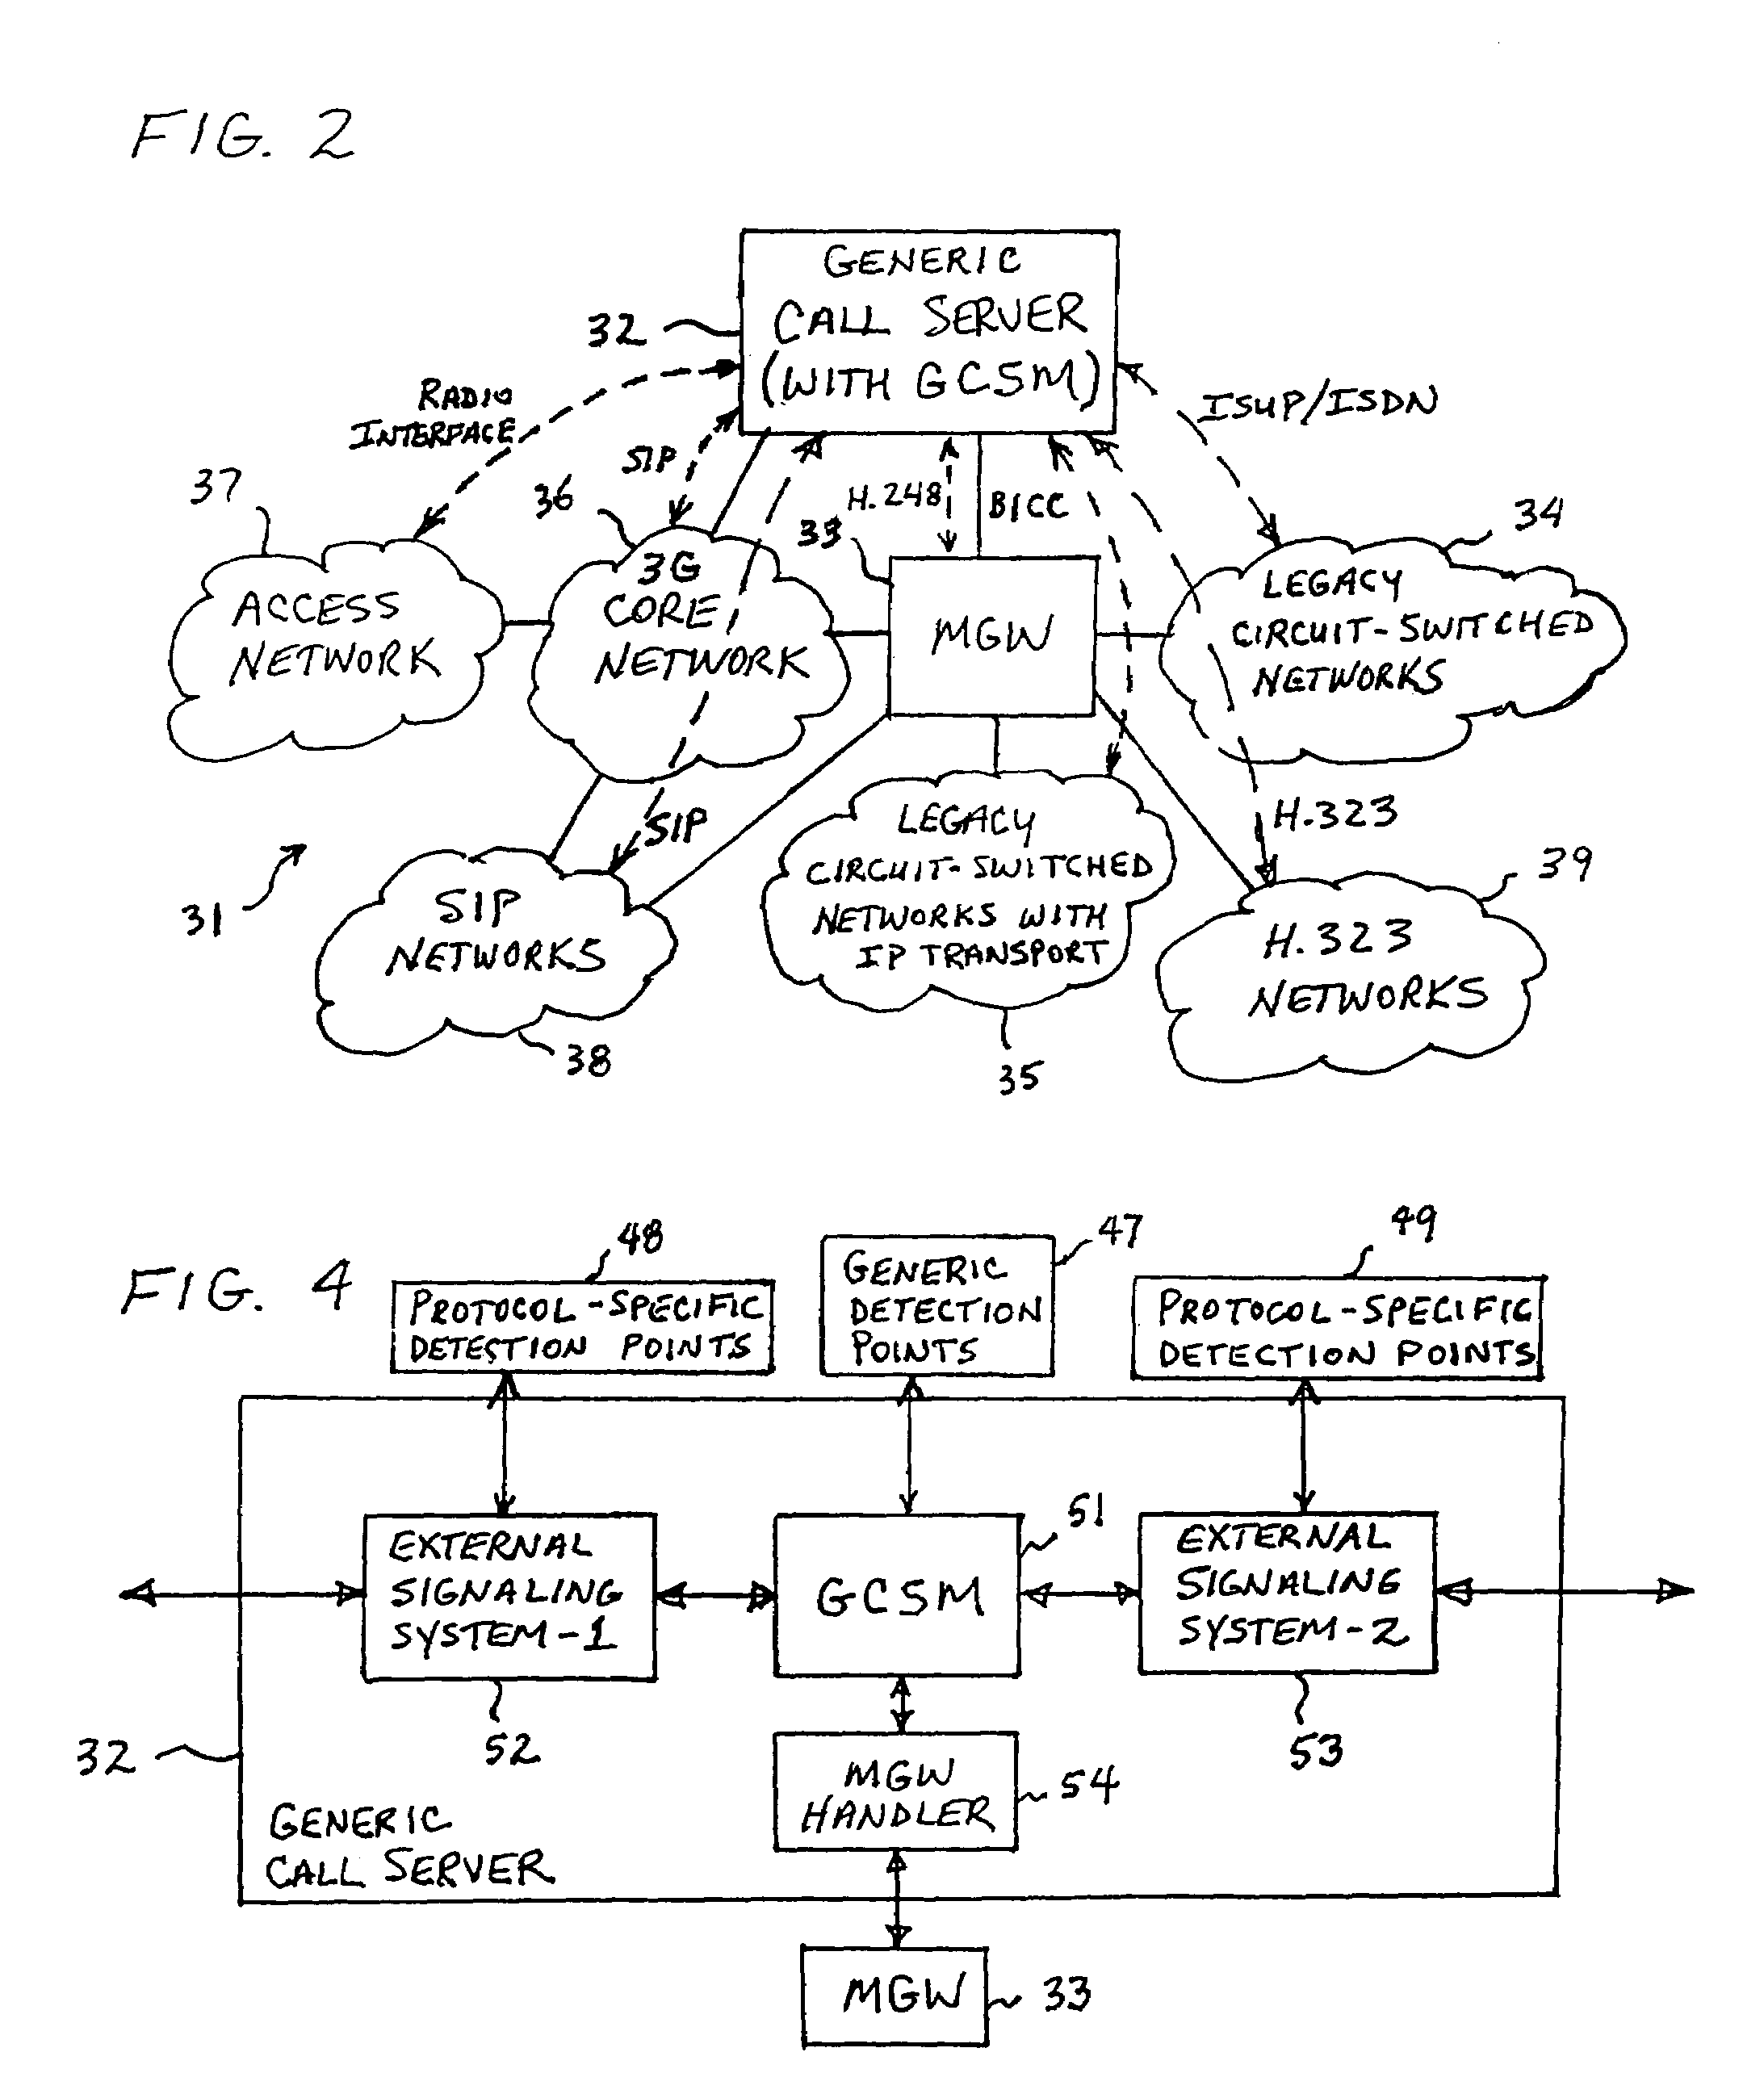 Generic call server and method of converting signaling protocols